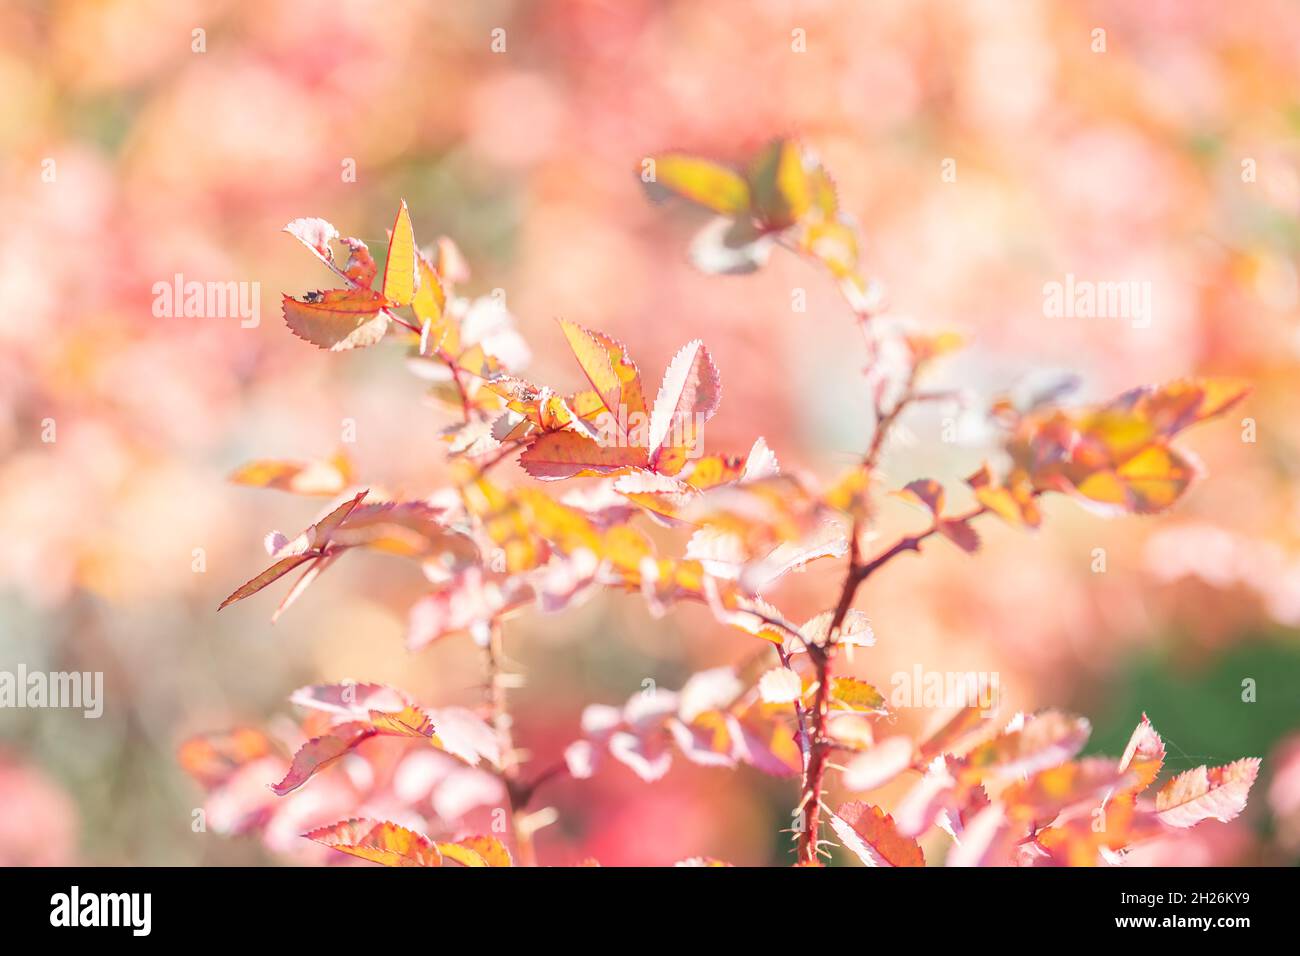 Bright colorful leaves on bushes in autumn, selective focus Stock Photo